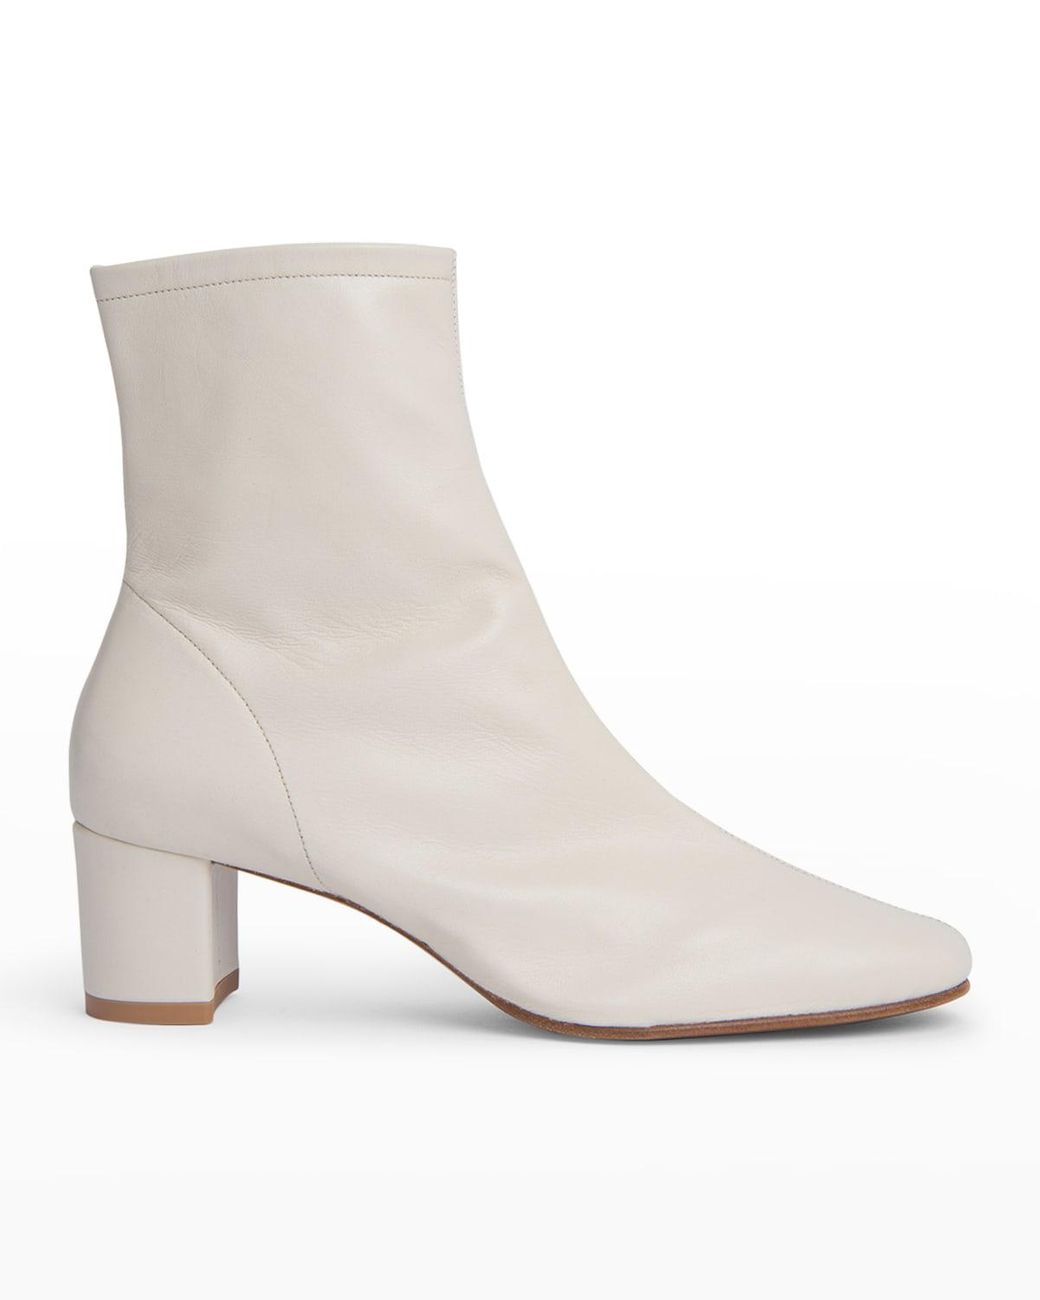 BY FAR Sofia Leather Penny Booties in White | Lyst